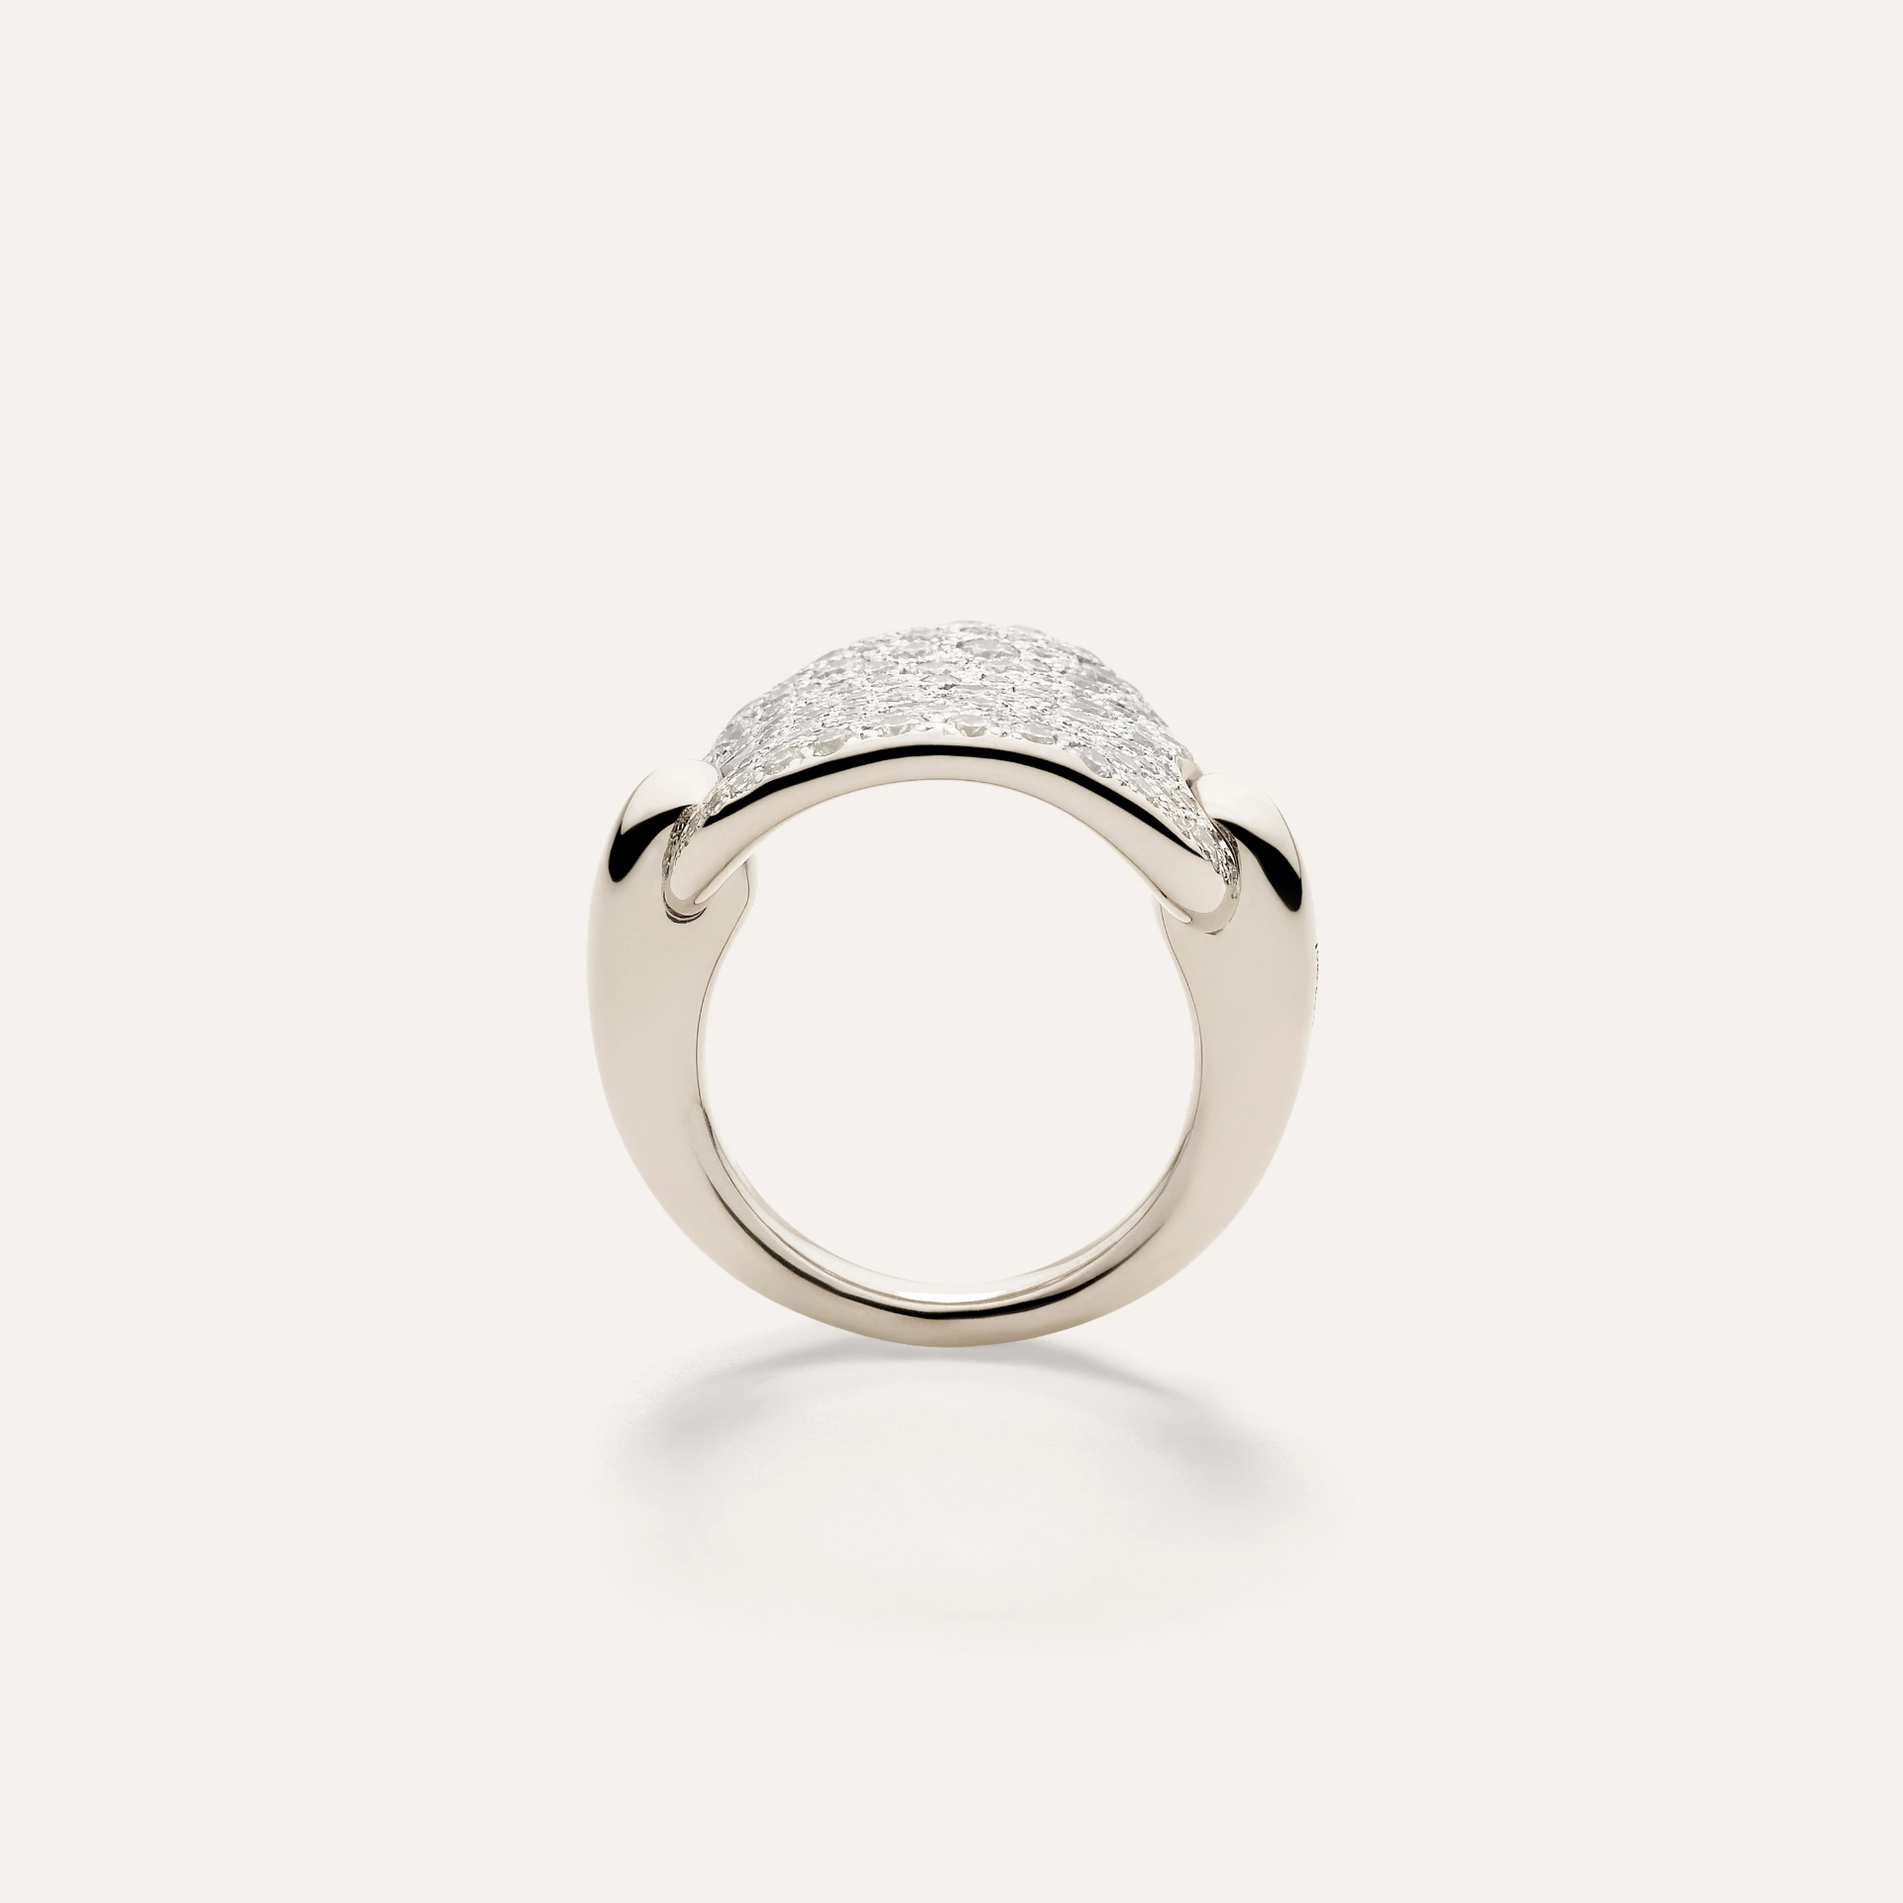 Large Sabbia white gold ring with diamonds